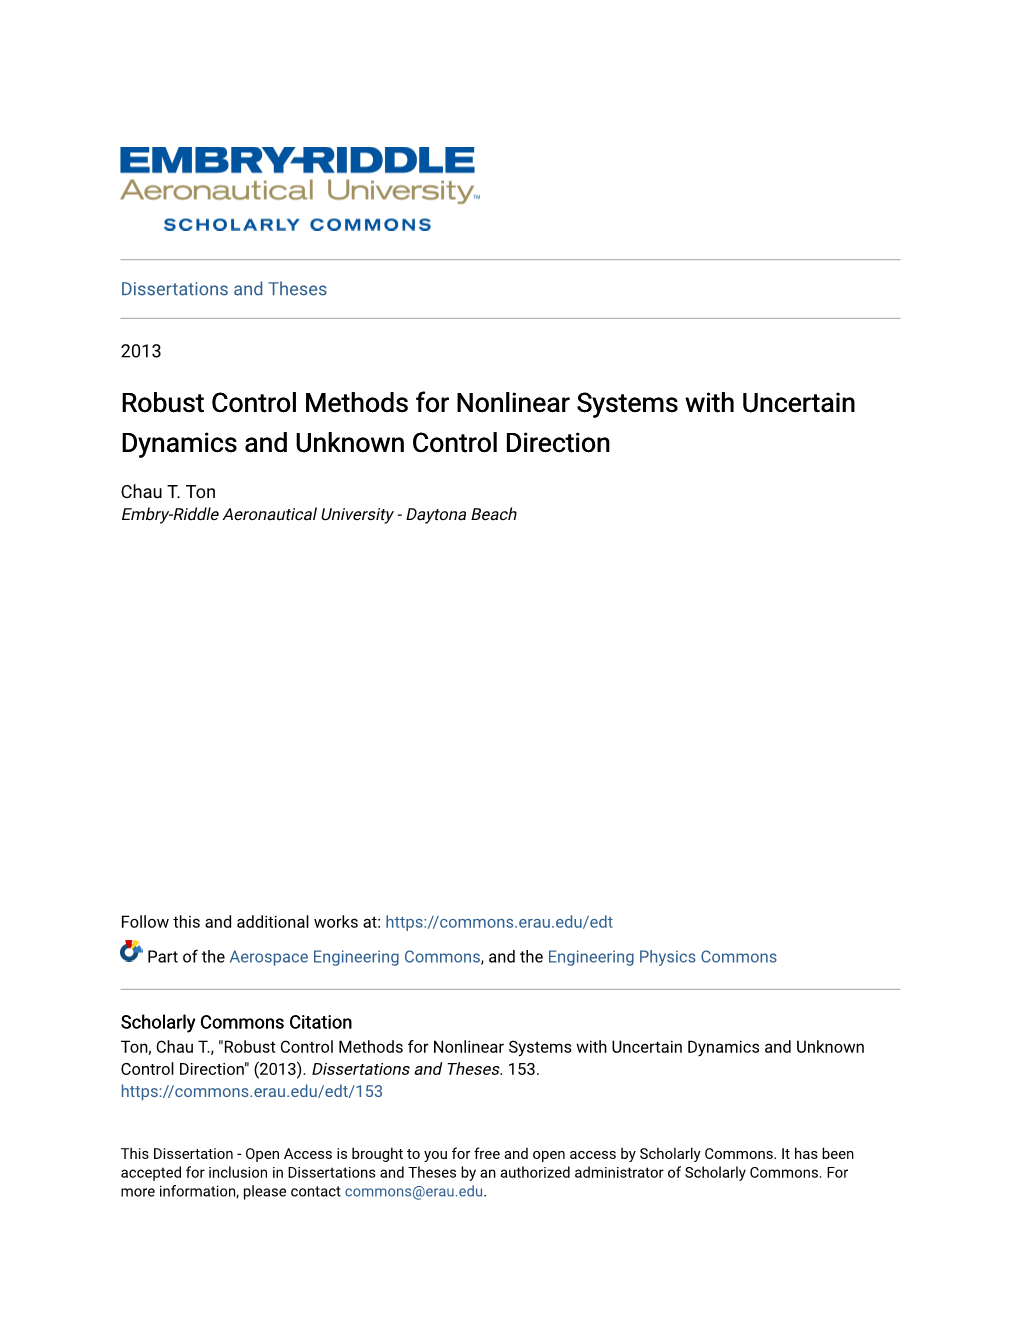 Robust Control Methods for Nonlinear Systems with Uncertain Dynamics and Unknown Control Direction